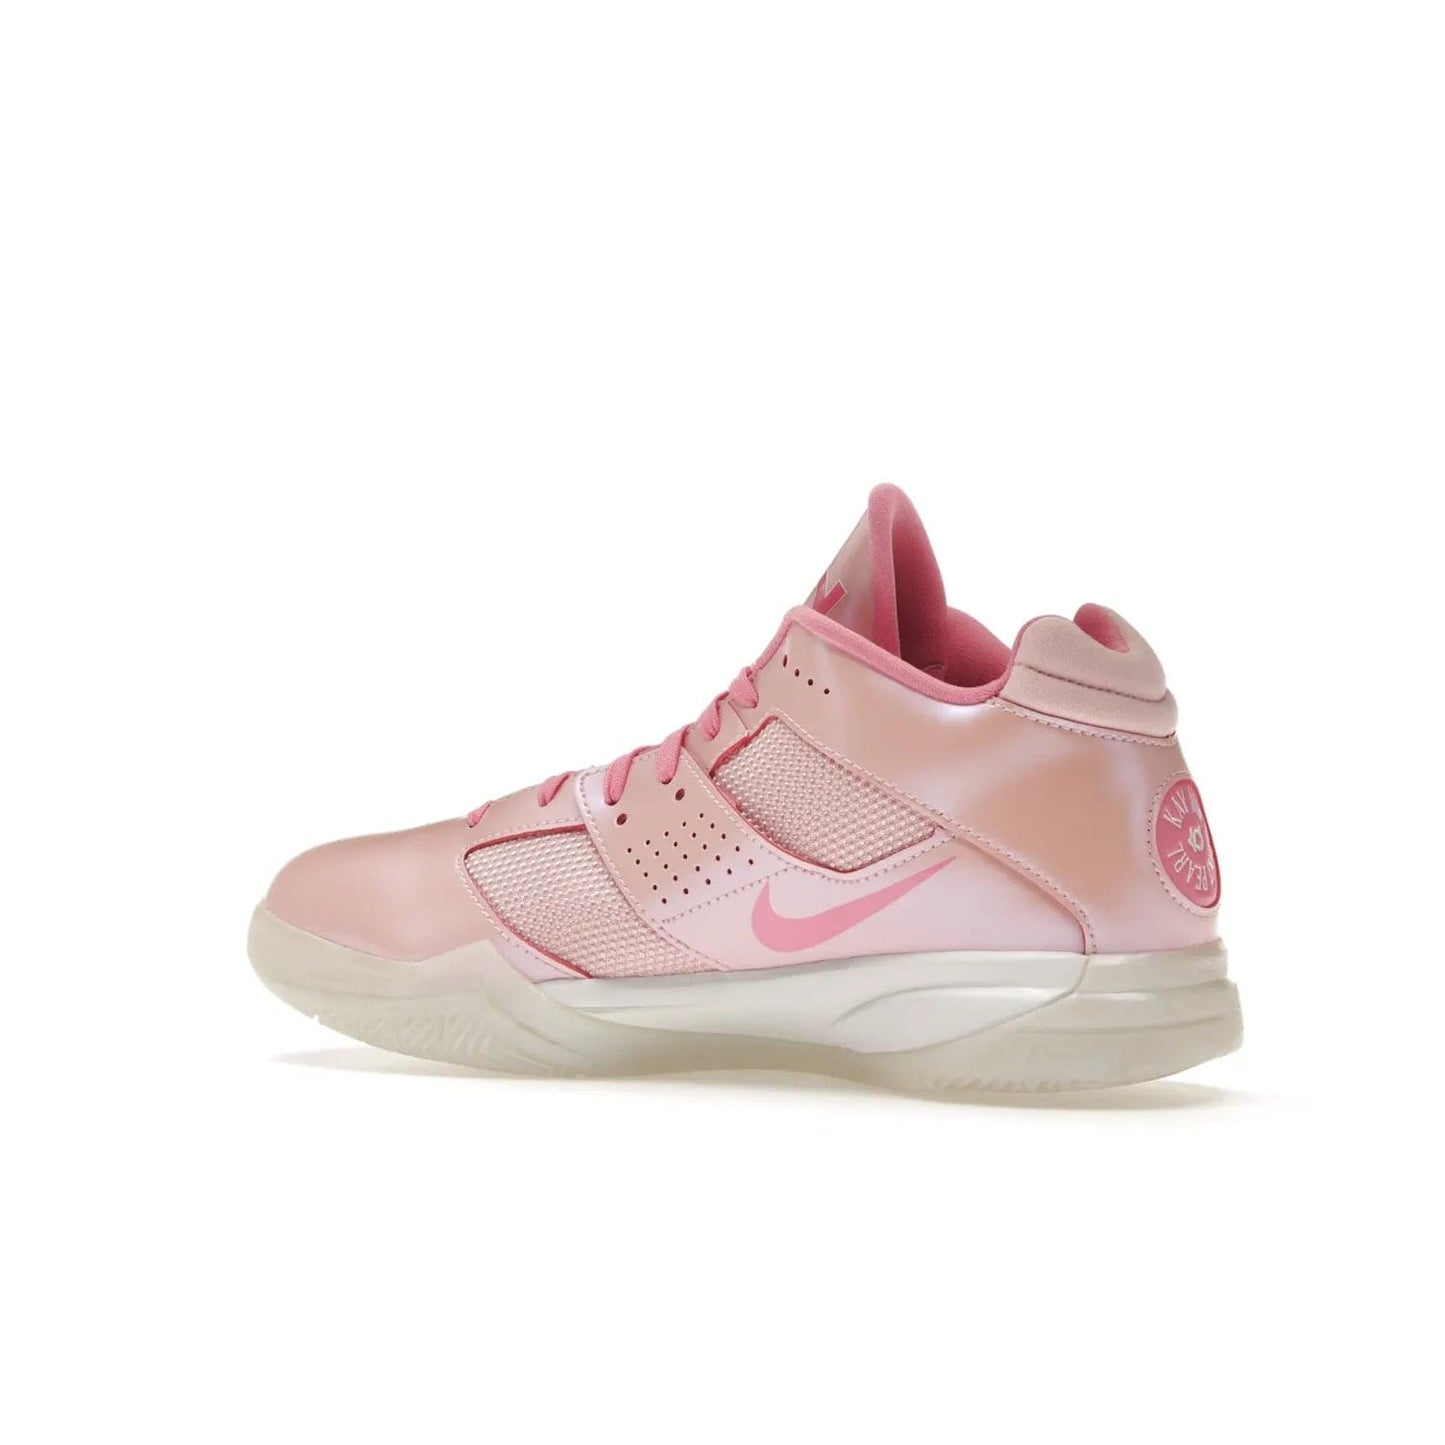 Nike KD 3 Aunt Pearl - Image 22 - Only at www.BallersClubKickz.com - Introducing the Nike KD 3 Aunt Pearl. Featuring a bold Medium Soft Pink, White, & Lotus Pink colorway. Get ready to stand out this October 15th.